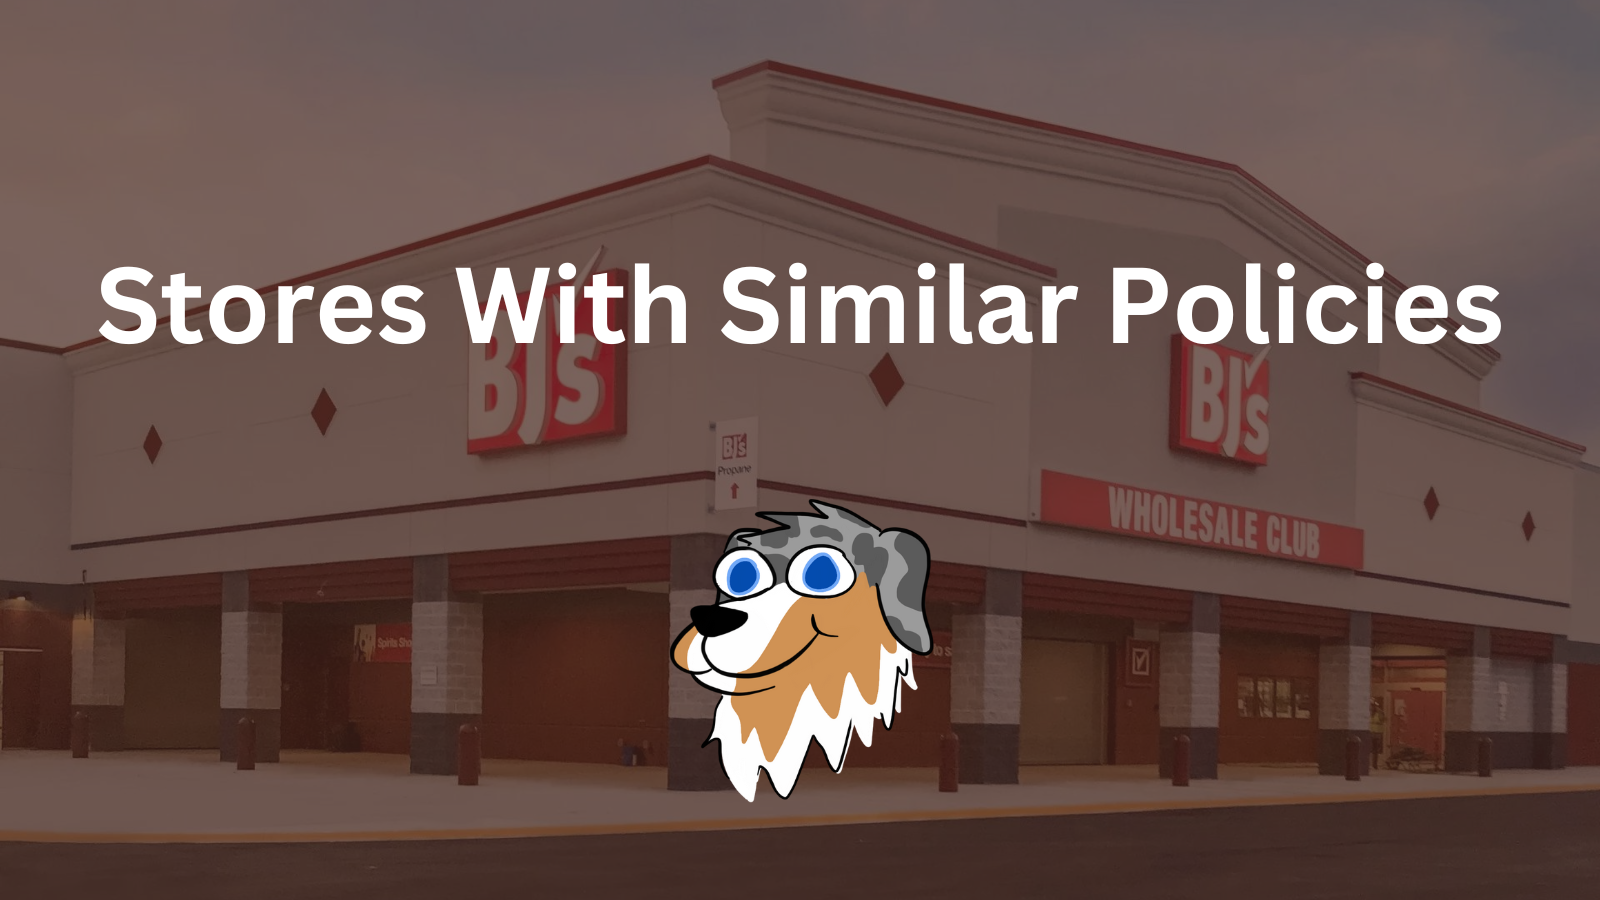 Image Text: "Stores With Similar Policies"